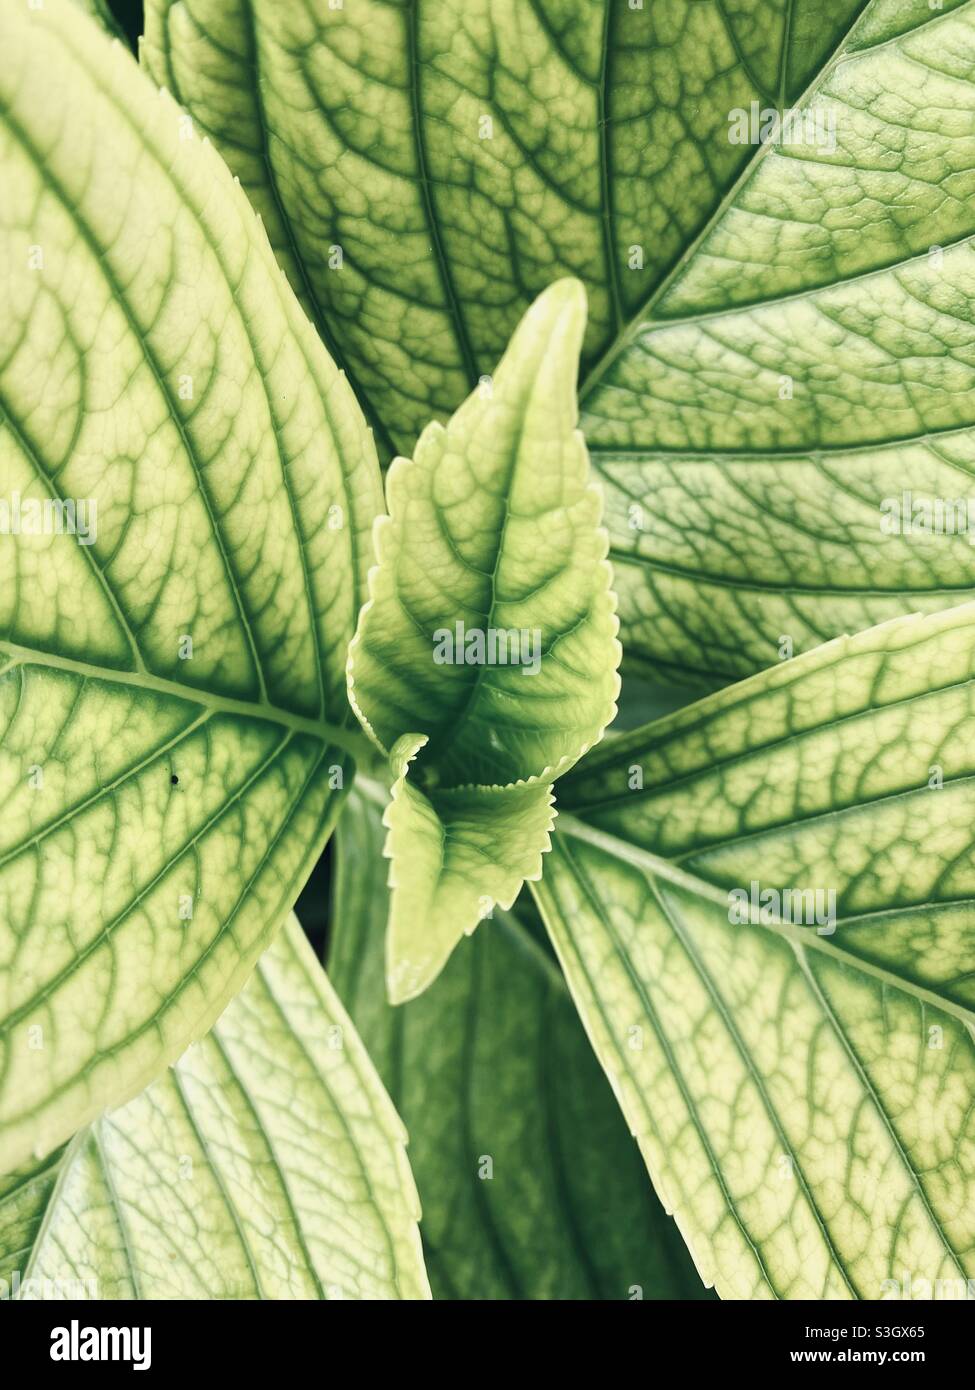 Green leaves in the garden texture nature Stock Photo